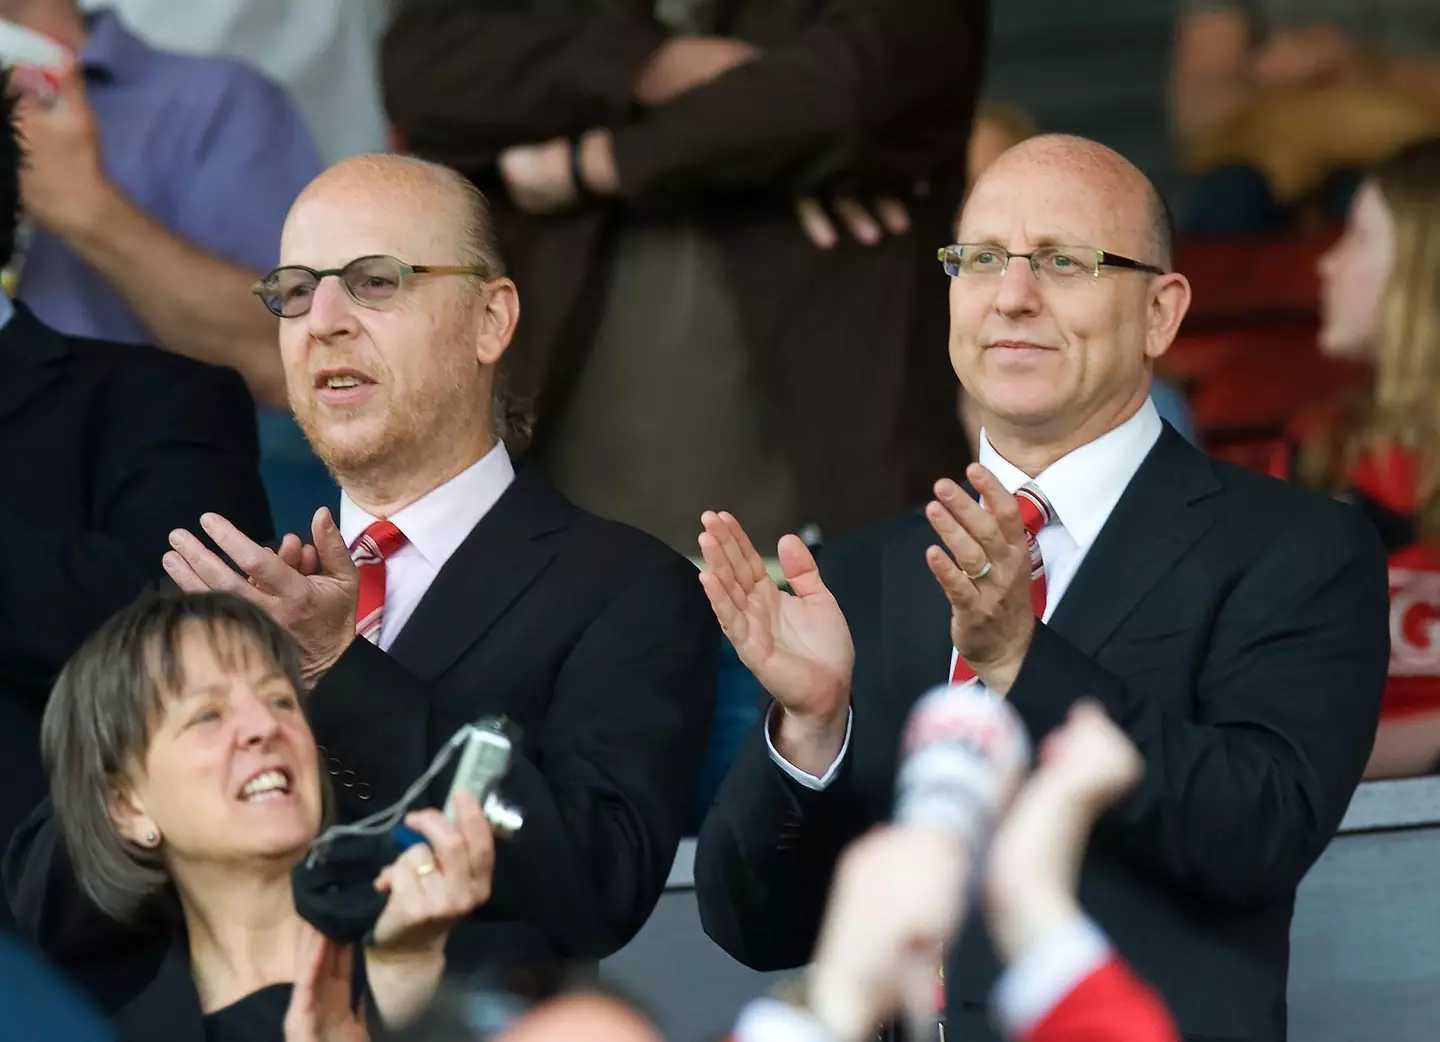 The Glazer family have owned United since 2005 (Image: Alamy)